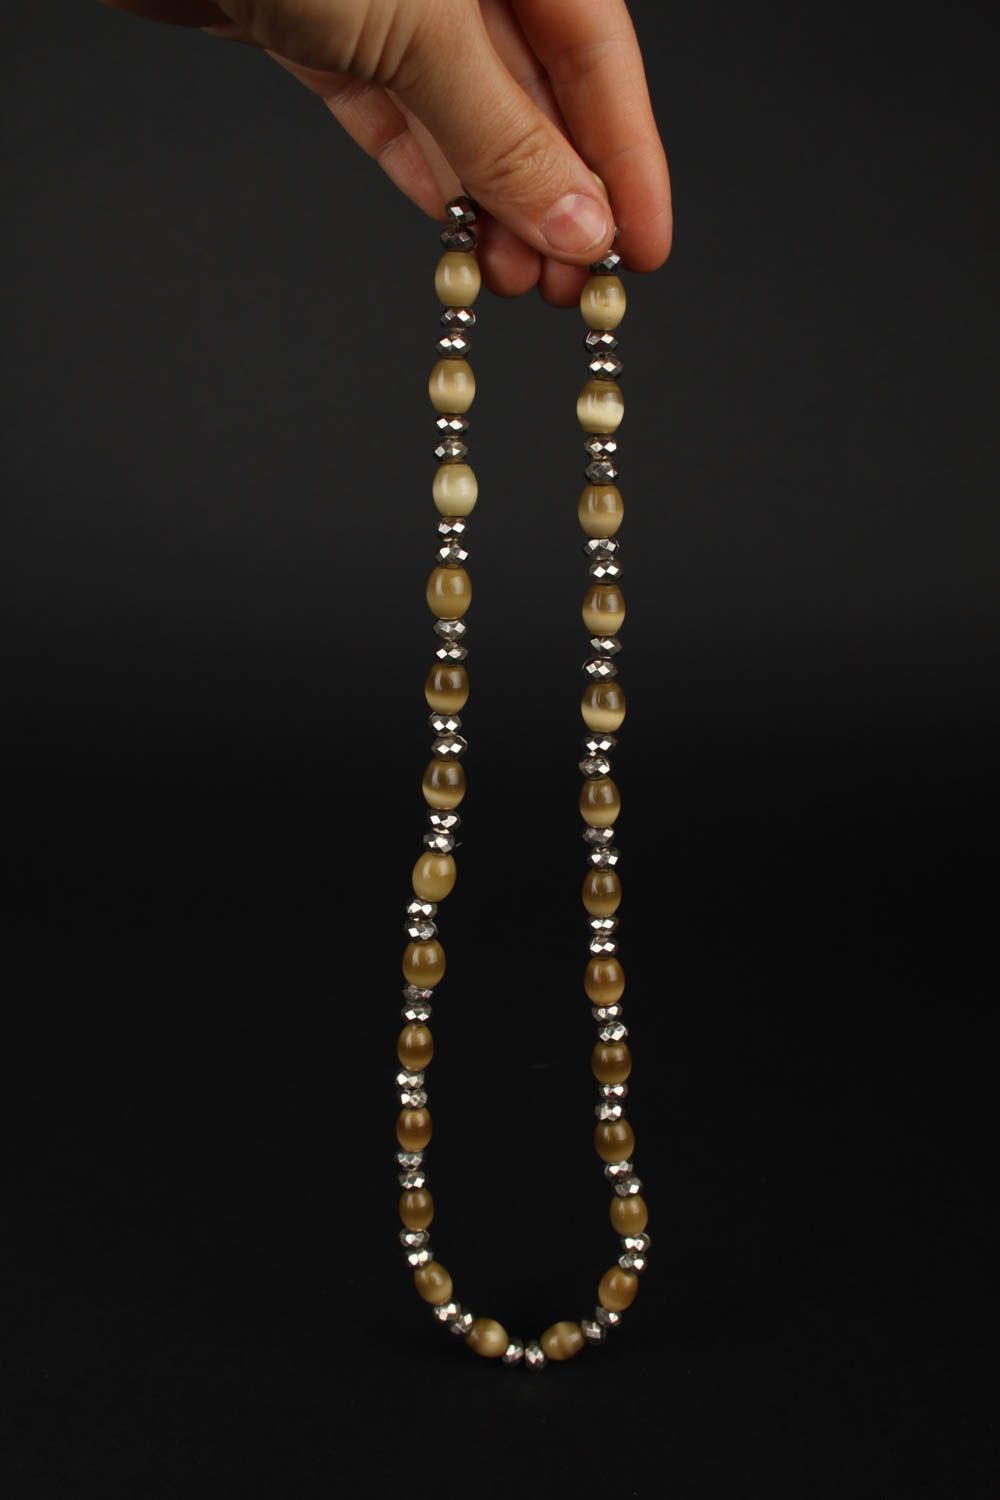 Handmade necklace with natural stone designer beaded jewelry festive necklace photo 4